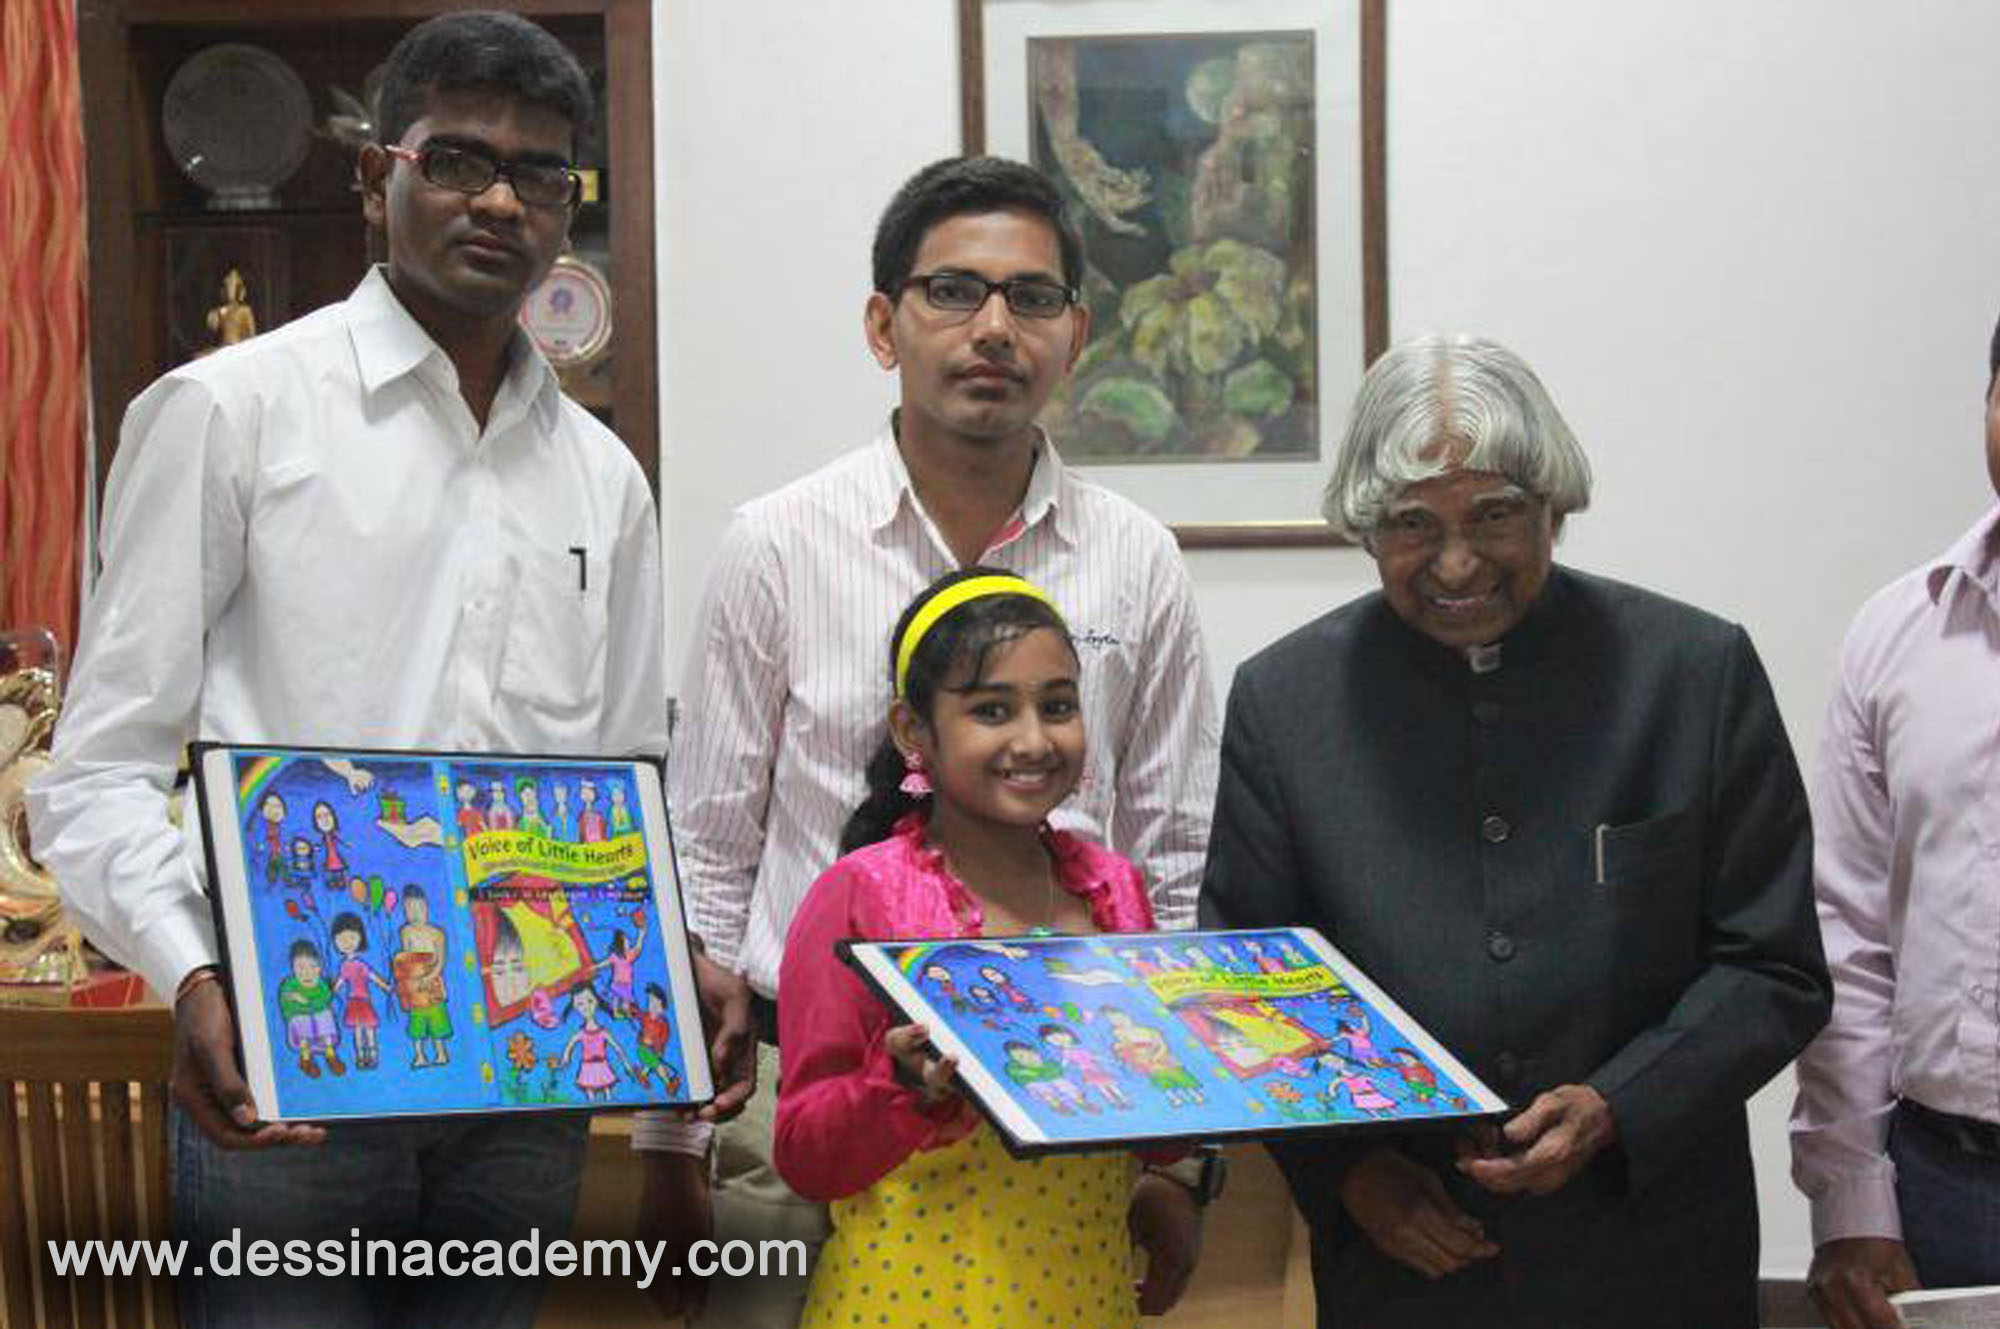 Dessin School of Arts Students Acheivement 1, Dessin School of Arts, canvas painting classes for kids in Marine Drive, Mumbai